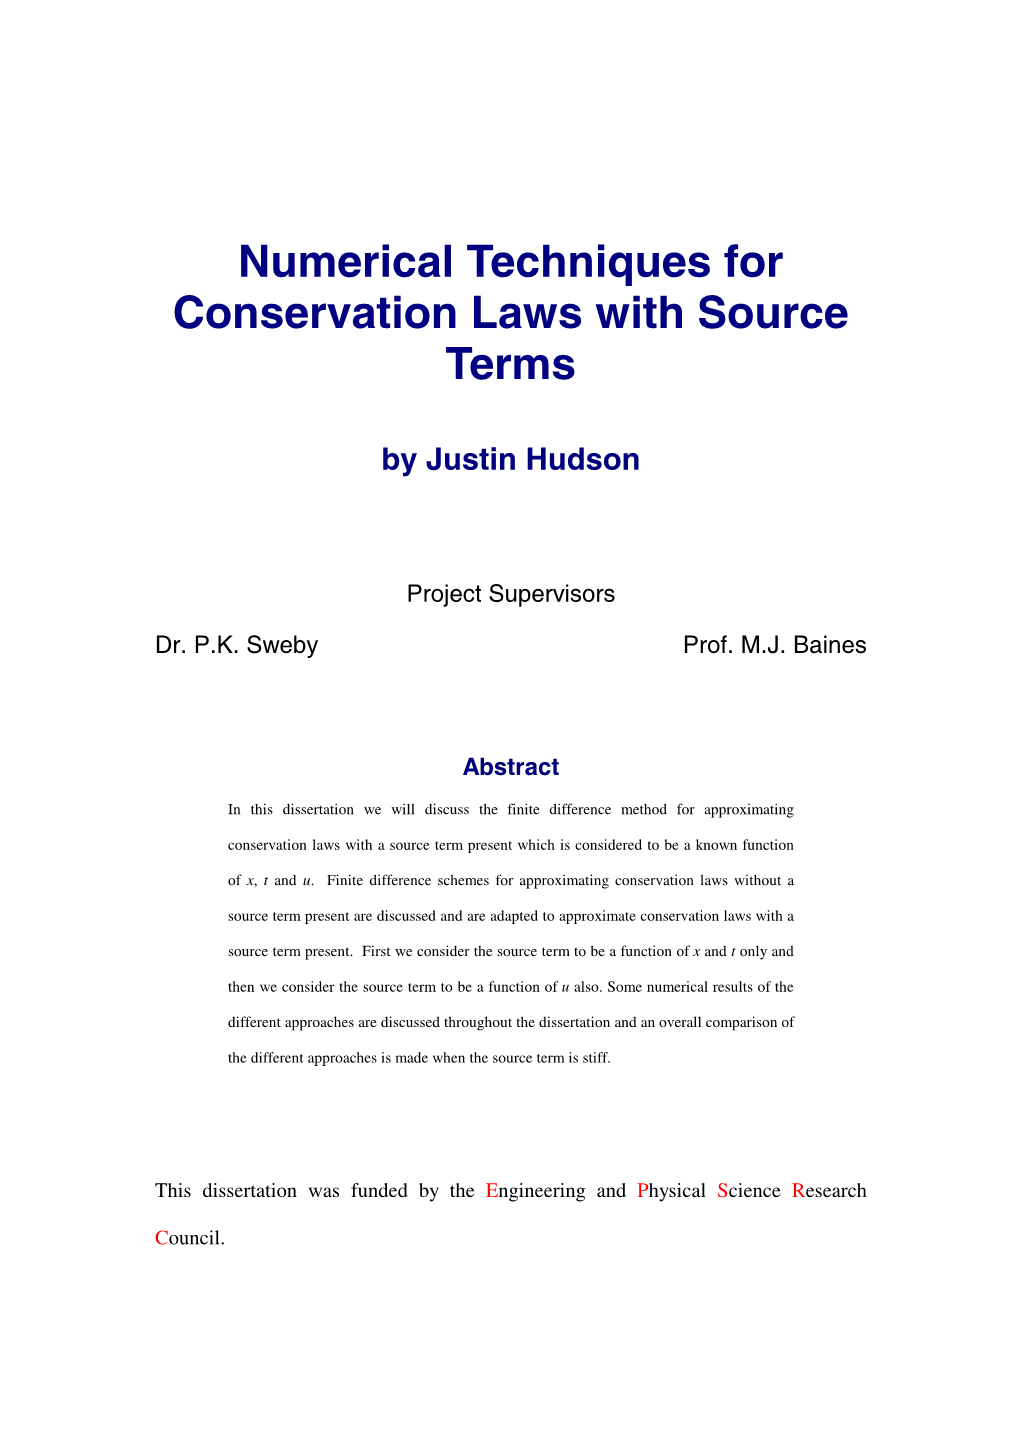 Numerical Techniques for Conservation Laws with Source Terms